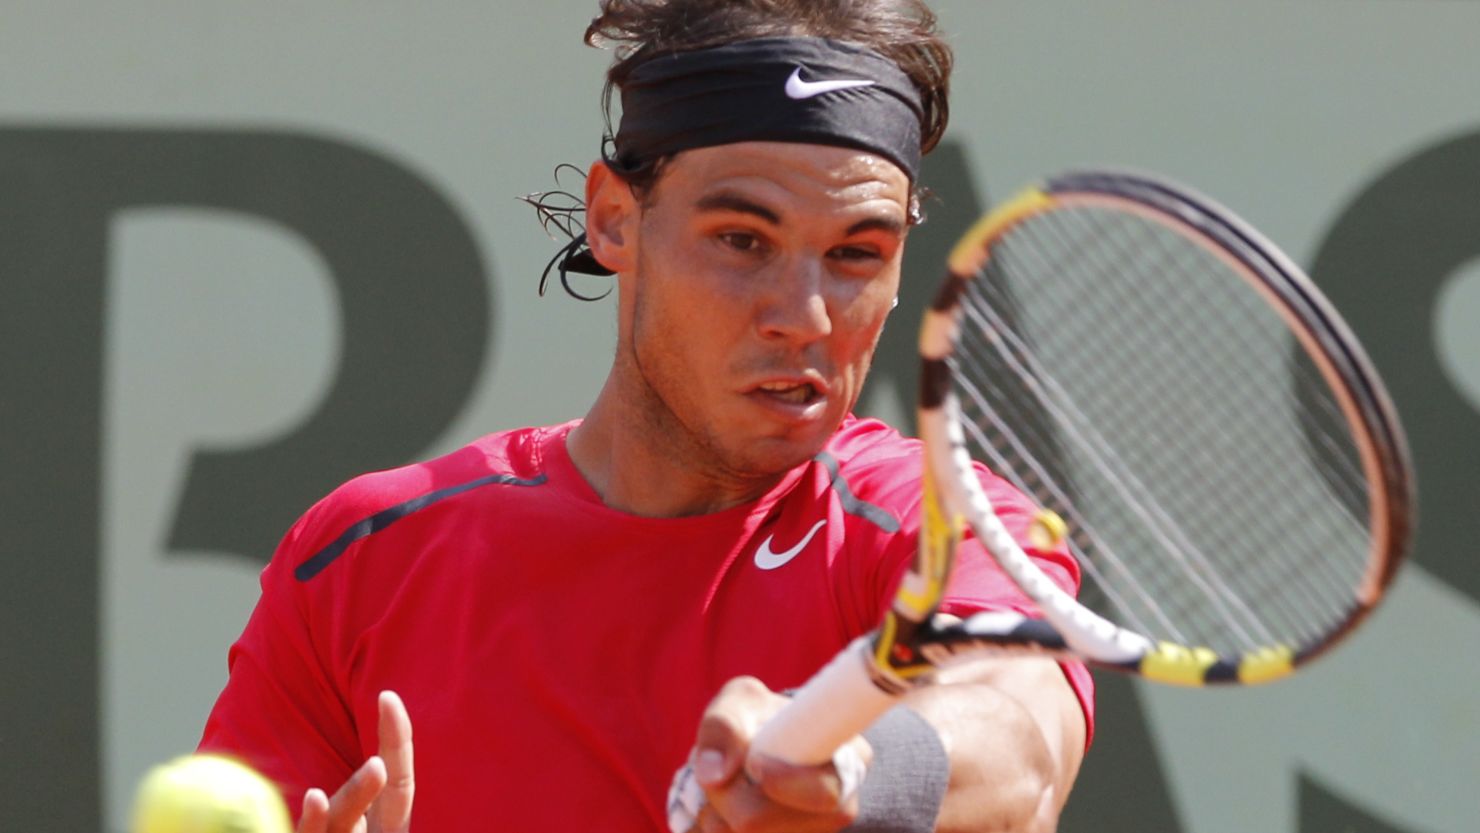 Rafael Nadal has only been beaten once at the French Open, by Sweden's Robin Soderling in 2009